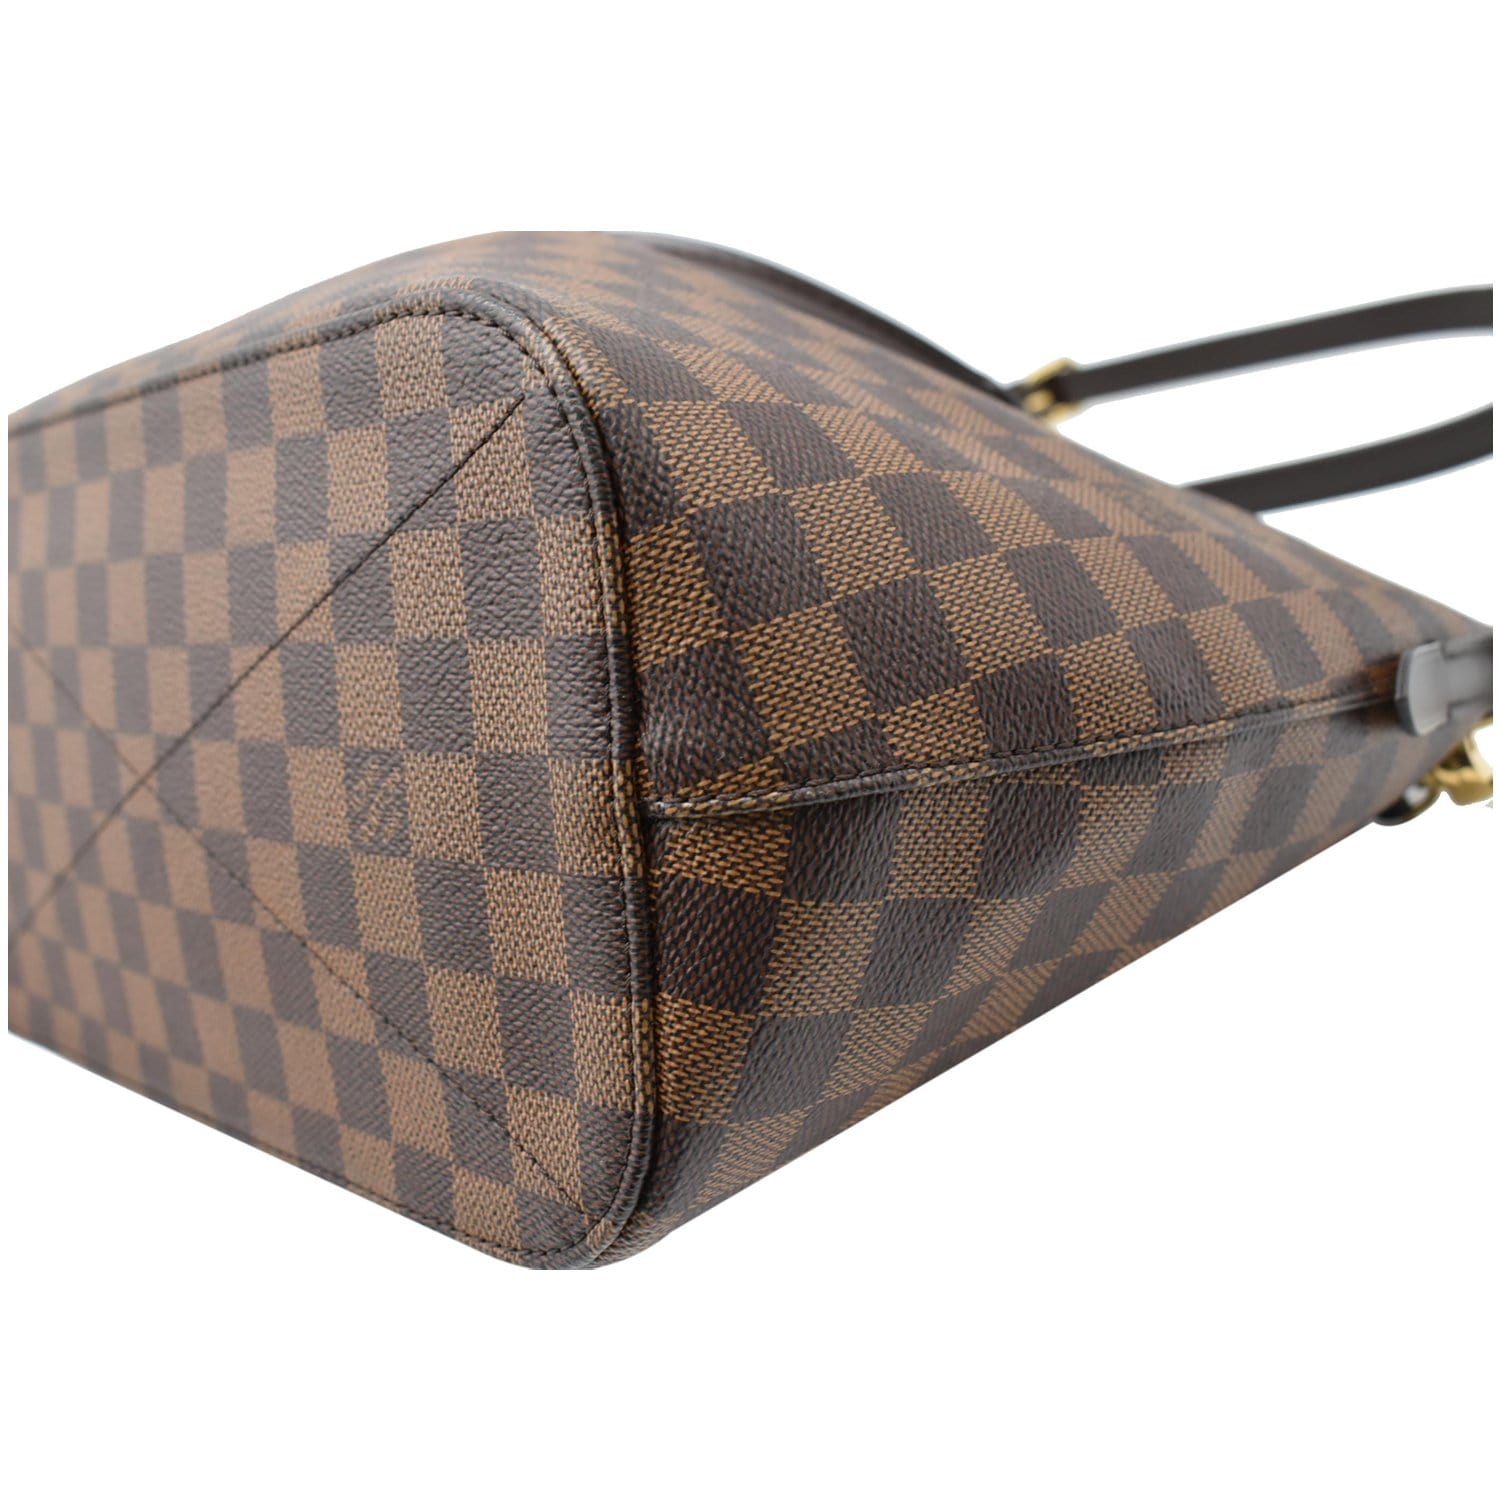 Louis Vuitton Siena MM Review & My First Designer Bag Purchase